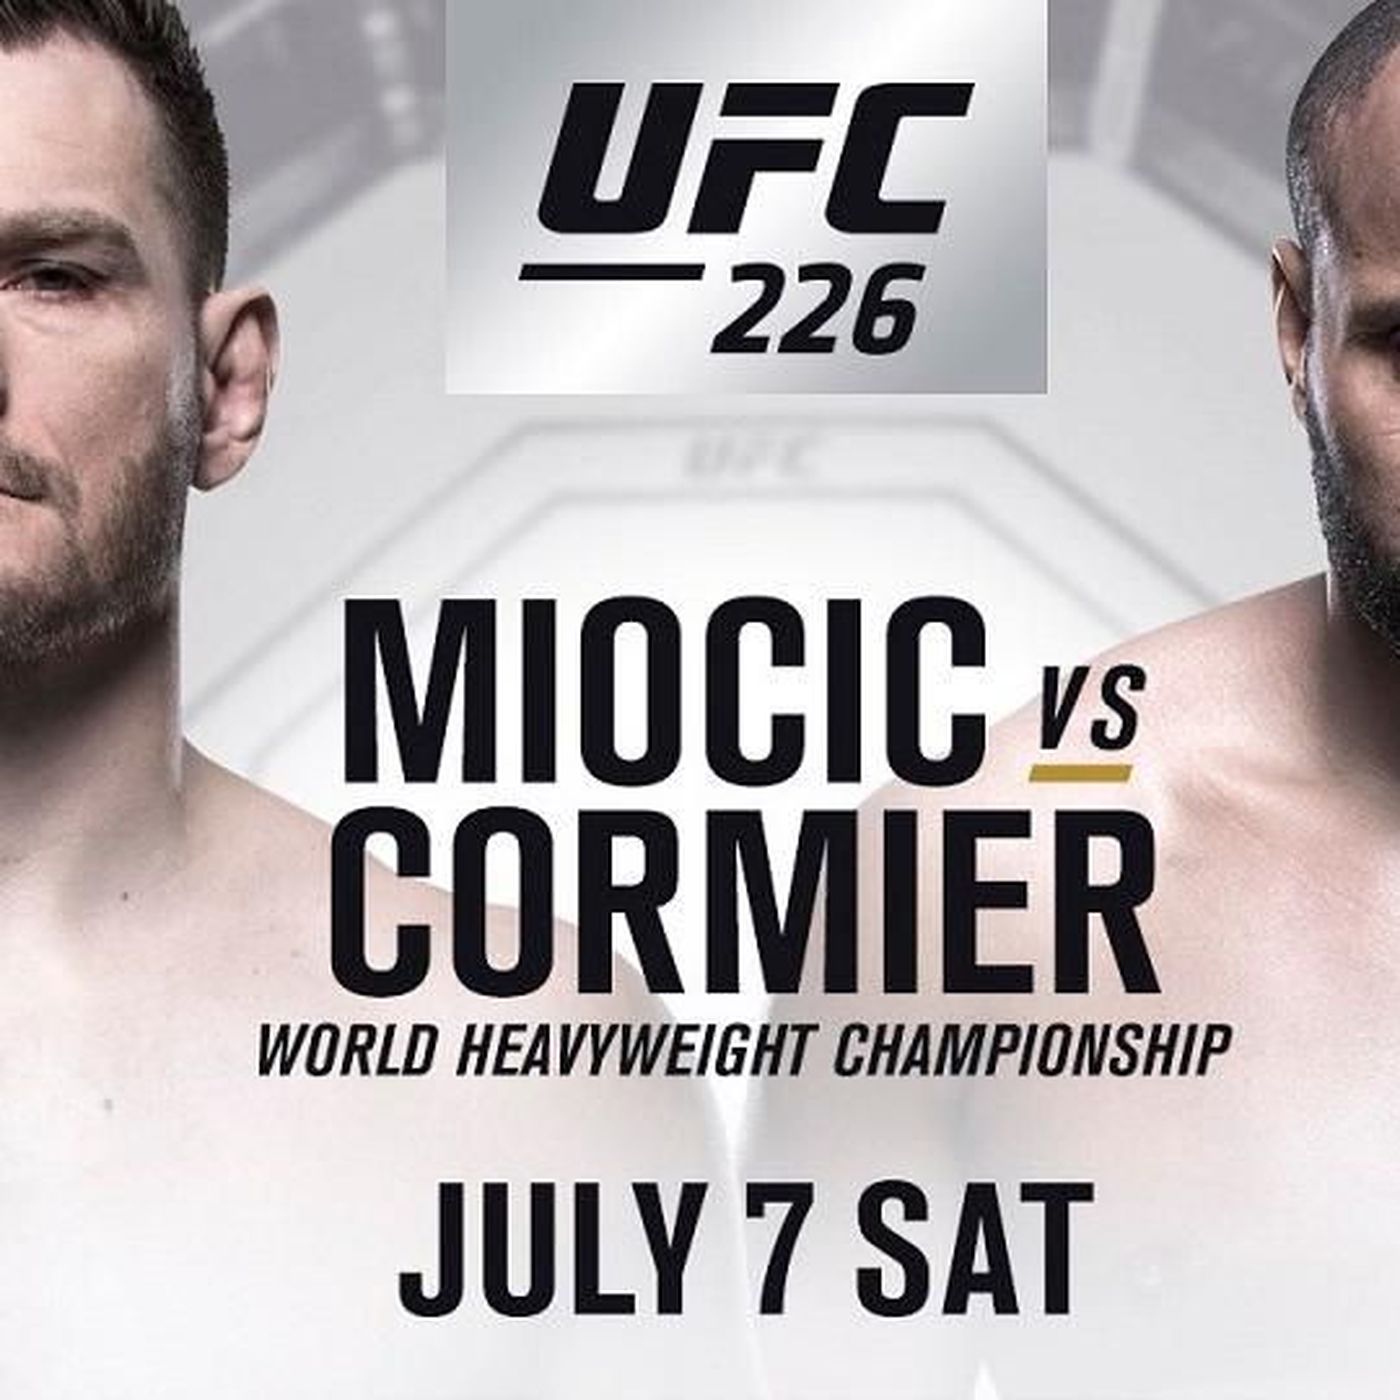 Ufc Fight Card Rumors And Updates For Miocic Vs